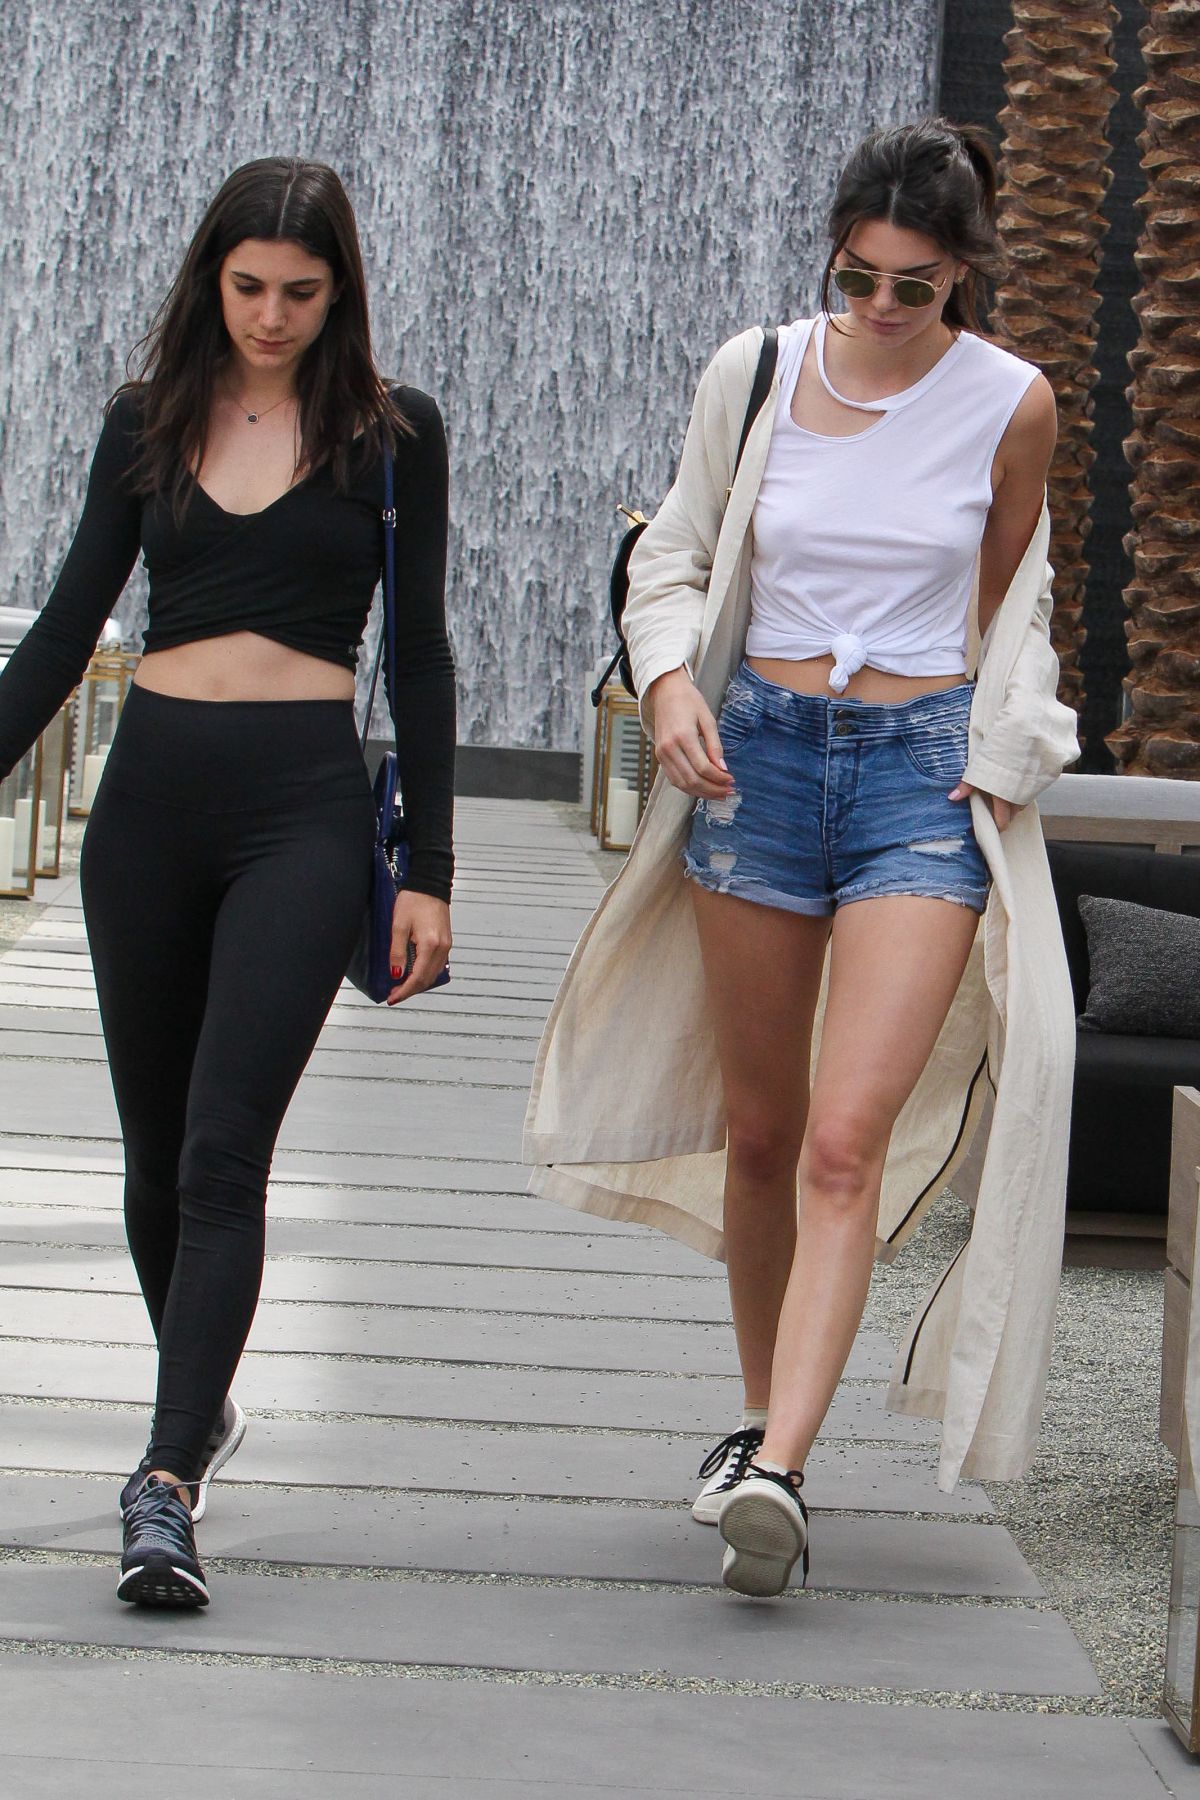 kendall-jenner-out-shopping-in-beverly-hills-04-06-2016_17.jpg